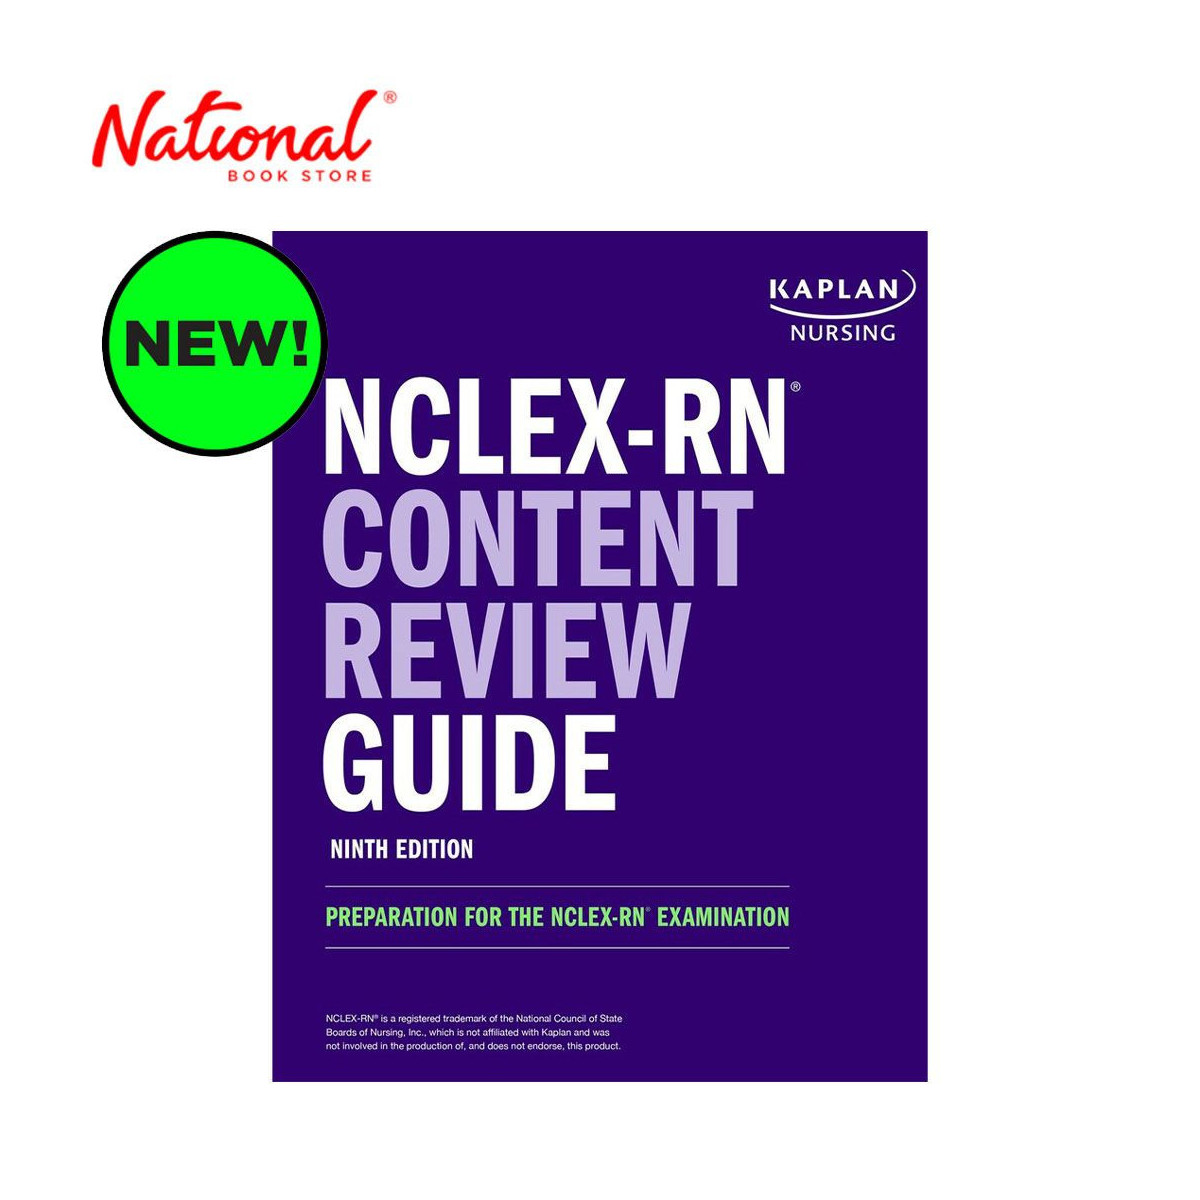 NCLEX-RN Content Review Guide by Kaplan Nursing - Trade Paperback - Reviewer